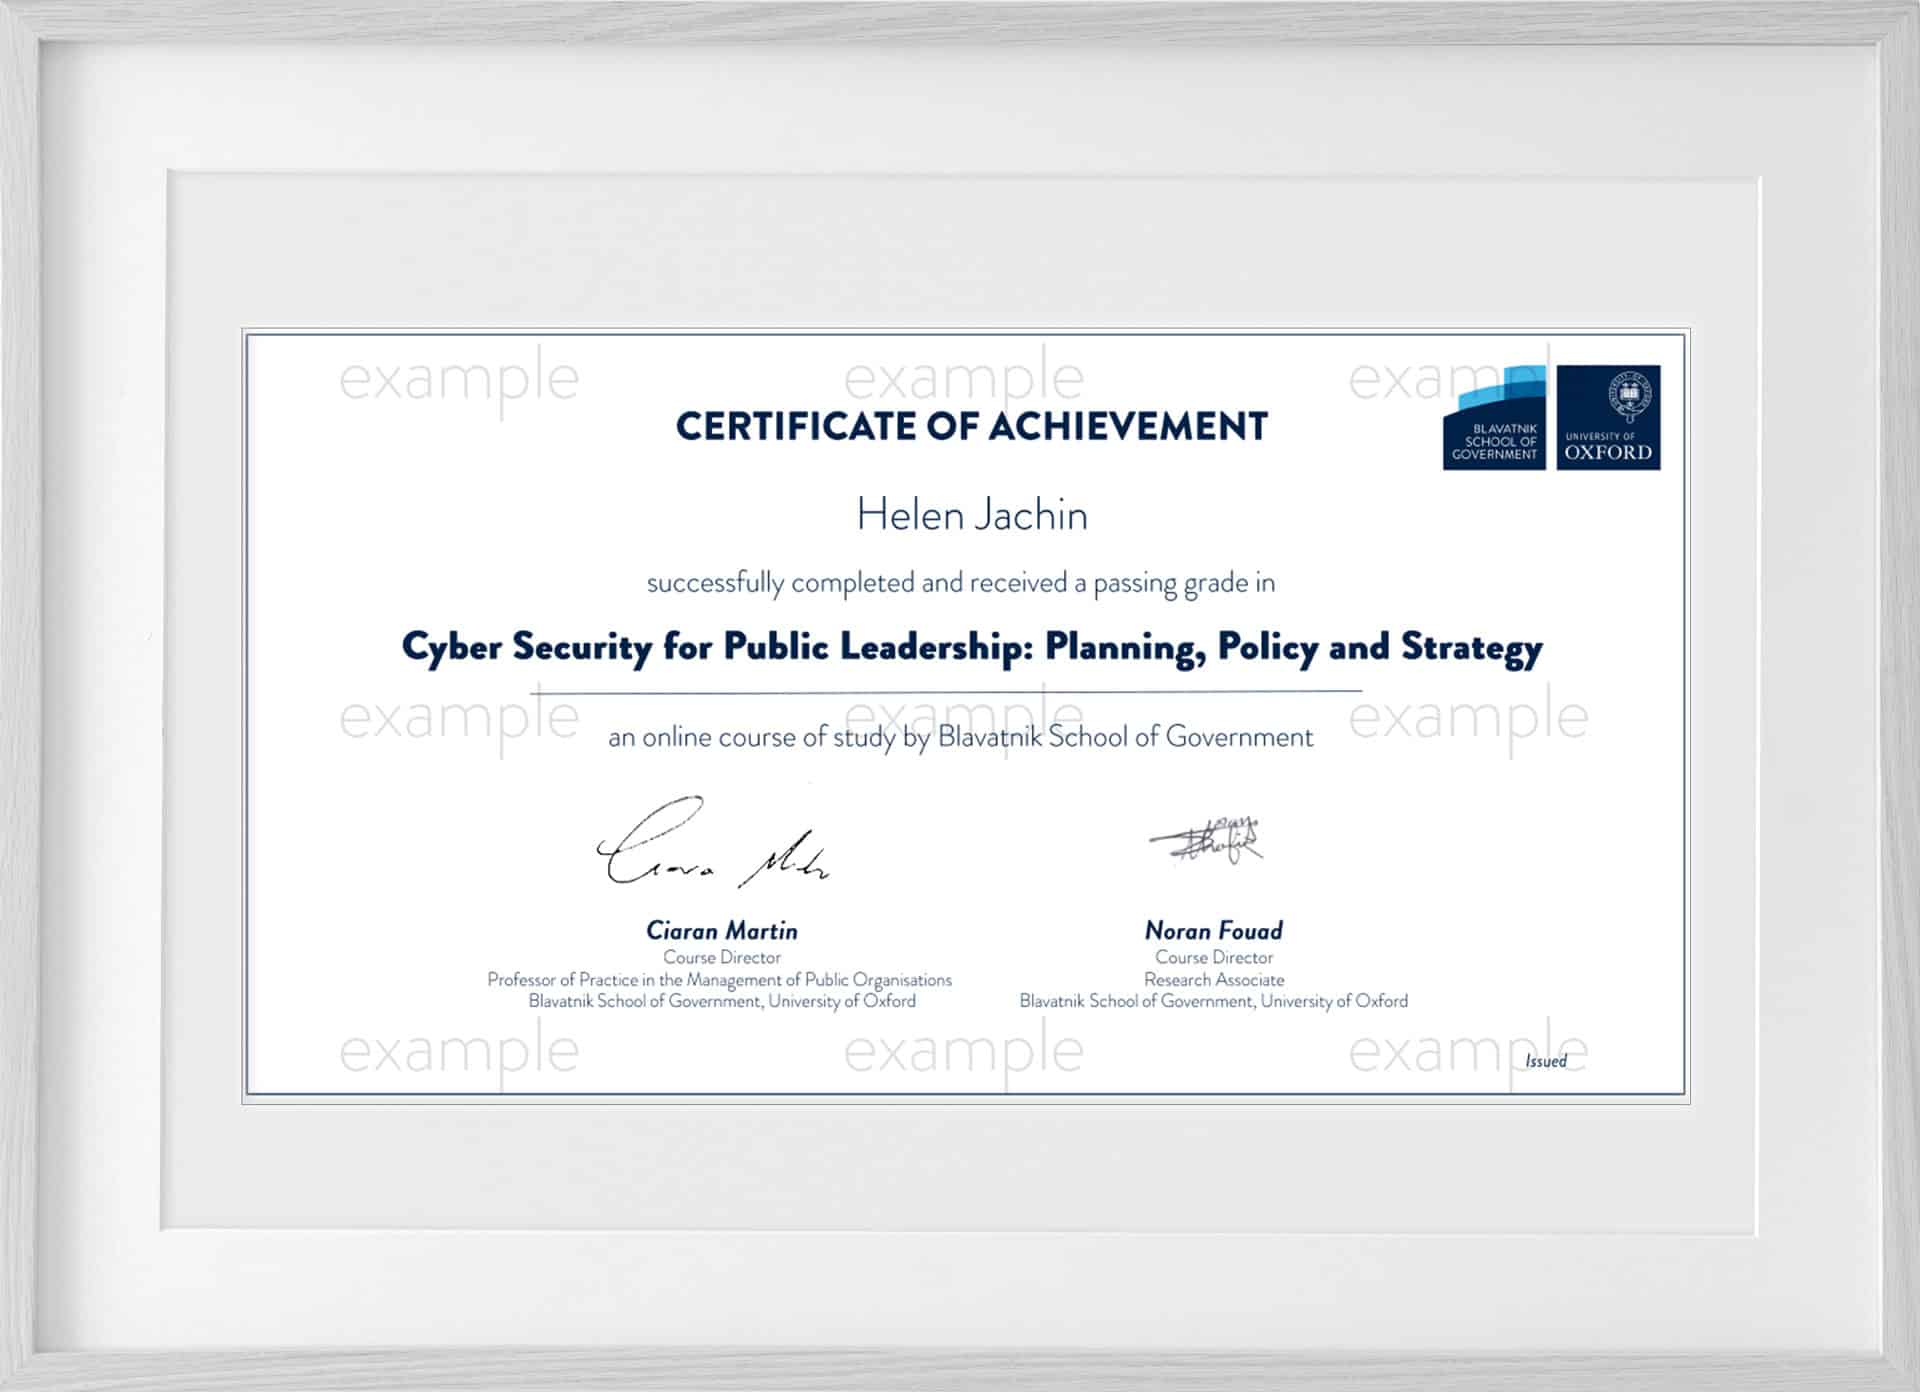 OXF-Certificate-CyberSPPPS-optimized-cropped